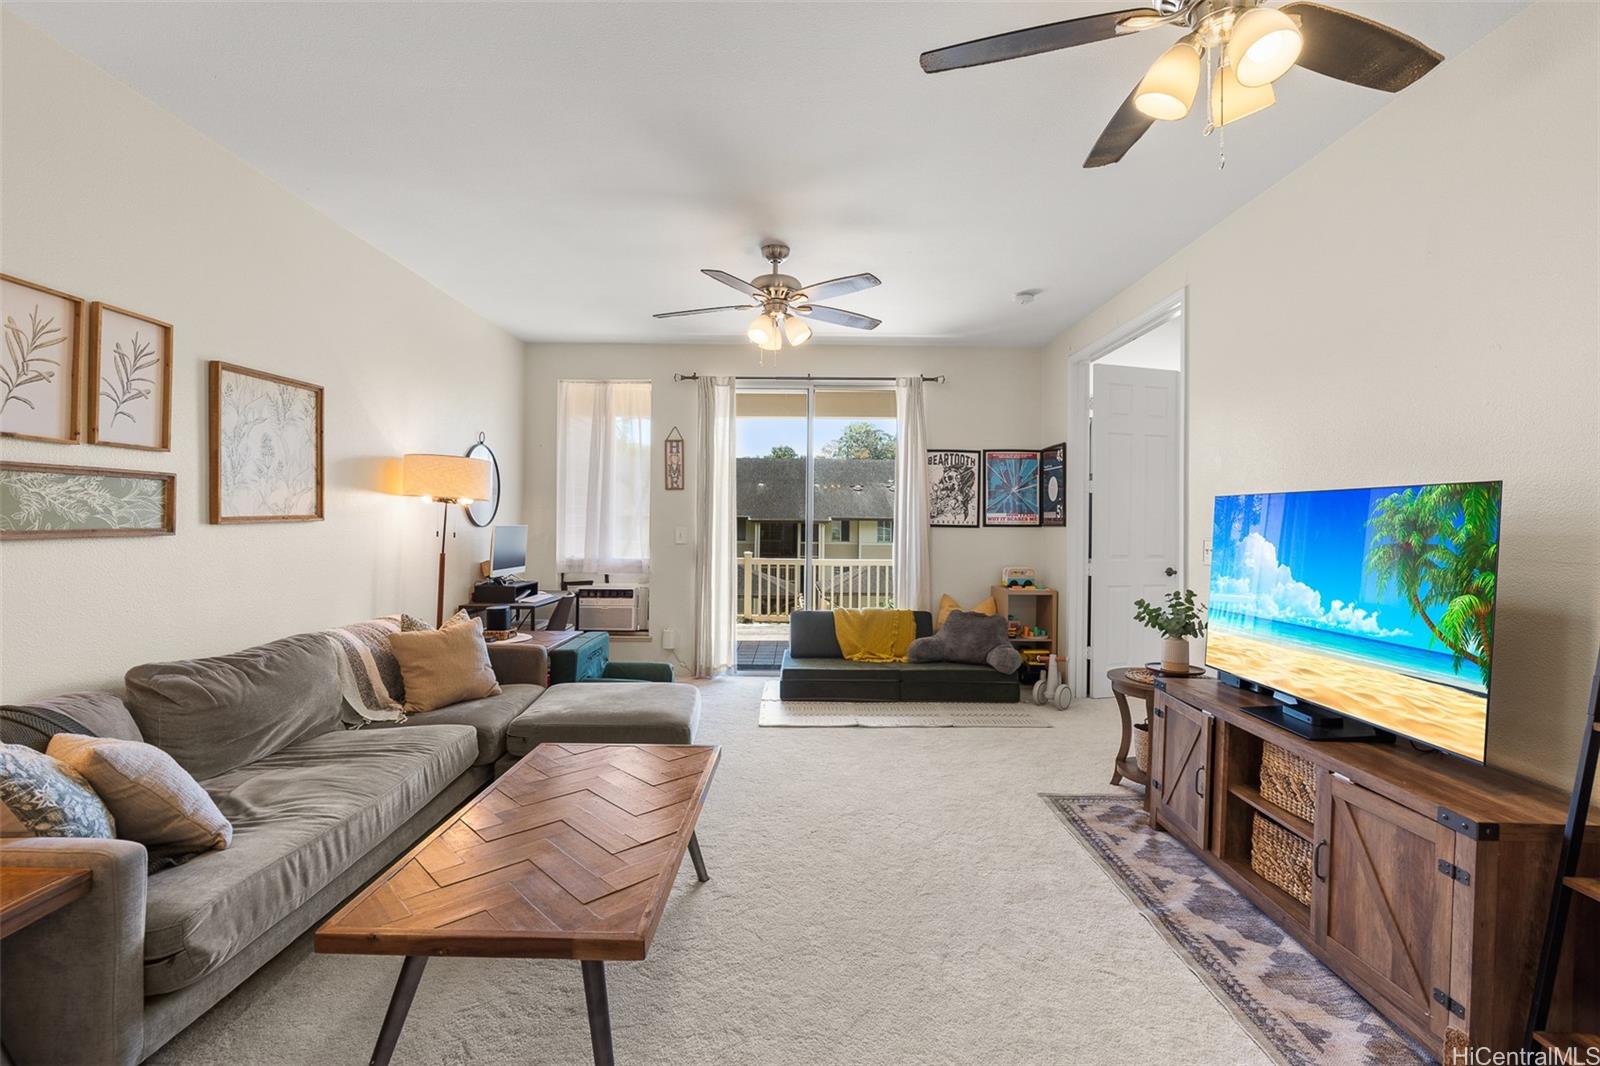 New carpet! $8500 value.Spacious, cozy layout, with patio sliding doors taking you out to your private, enclosed patio lanai. Ceiling fans can help lower electric bills. Window AC. This is 808Living!